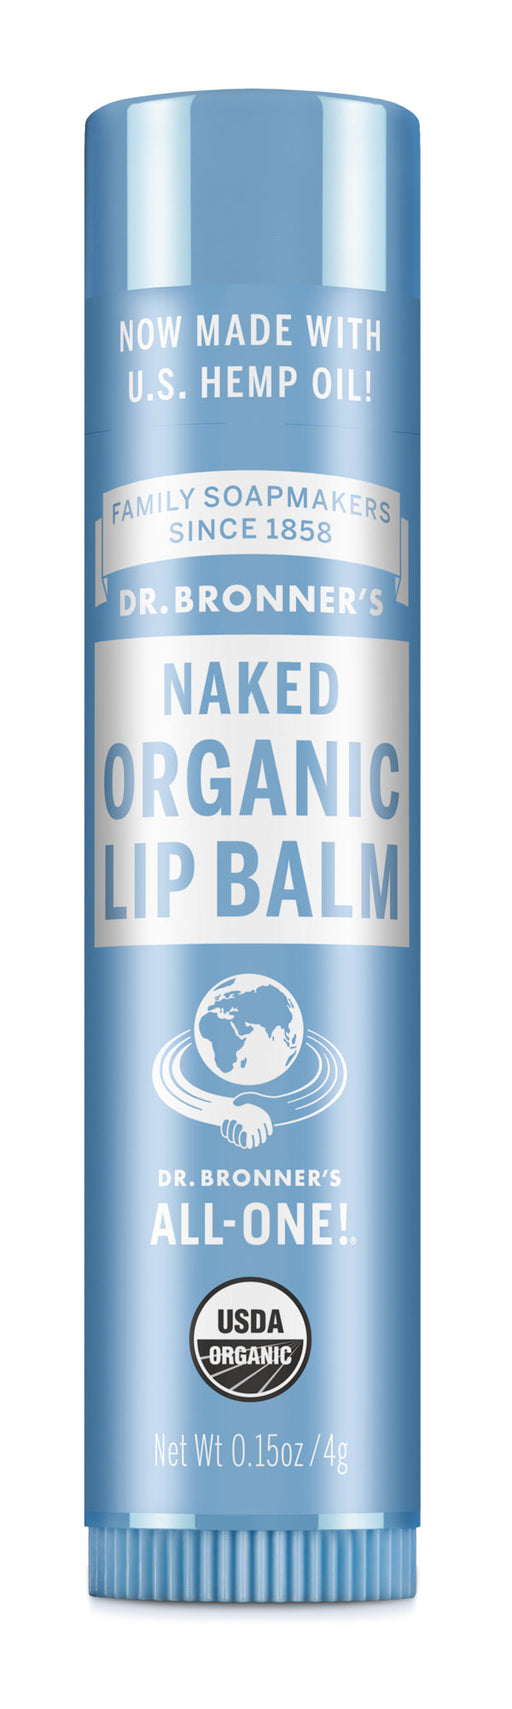 Naked - Organic Lip Balms - .15 oz - ProCare Outlet by Dr Bronner's